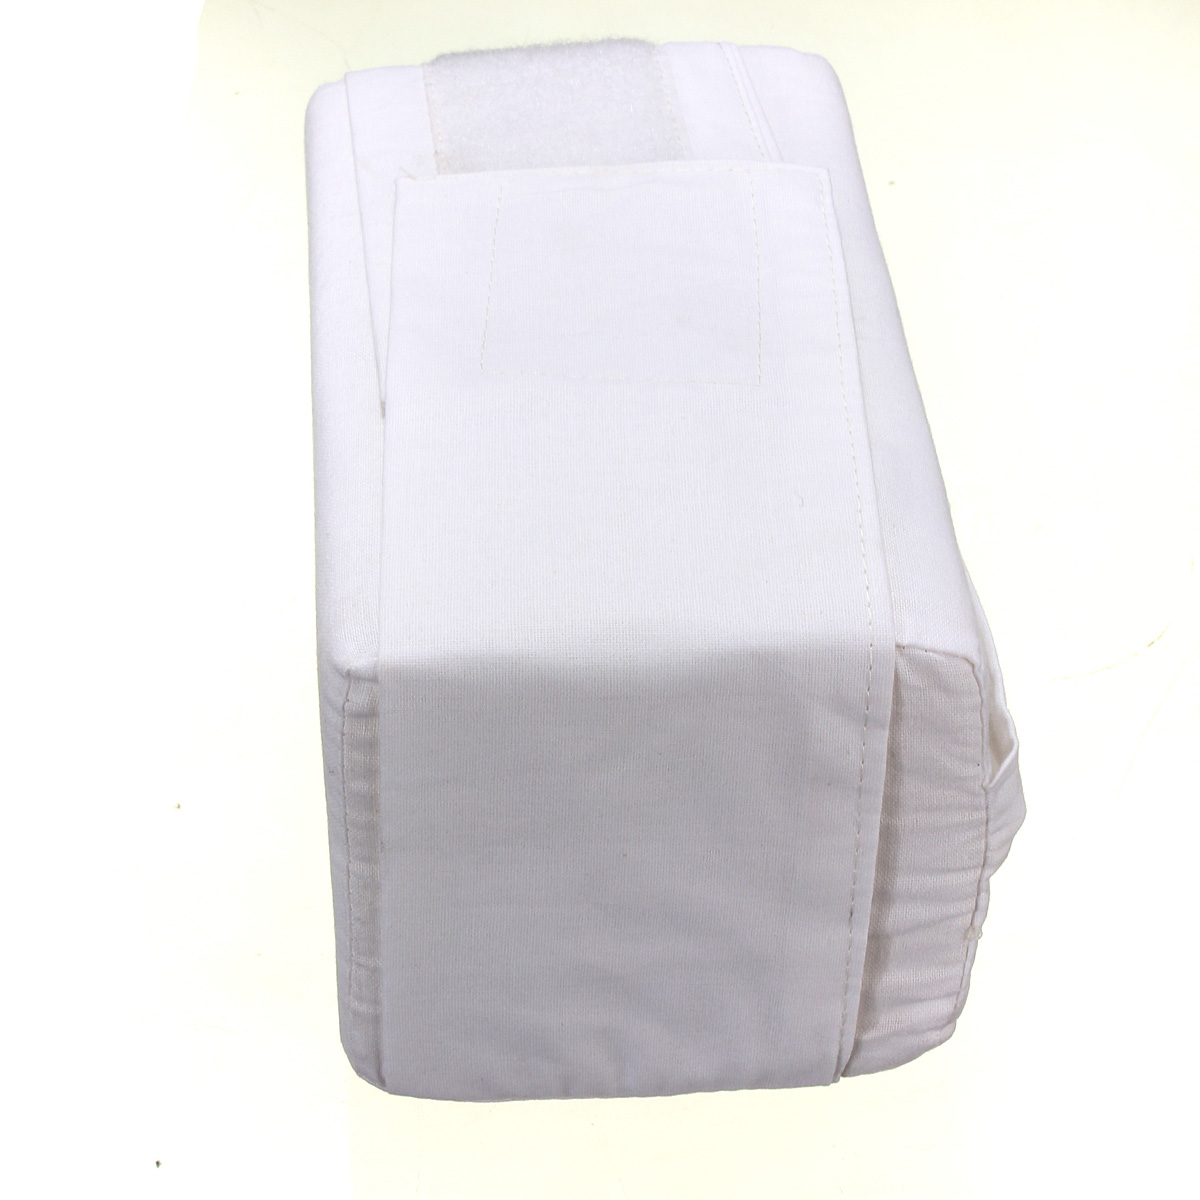 Knee-Ease-Pillow-Sciatica-Relief-Cushion-Ankle-Pads-Sponge-Pads-Soft-Bed-Sleeping-Aid-Lower-Back-Art-1709181-9